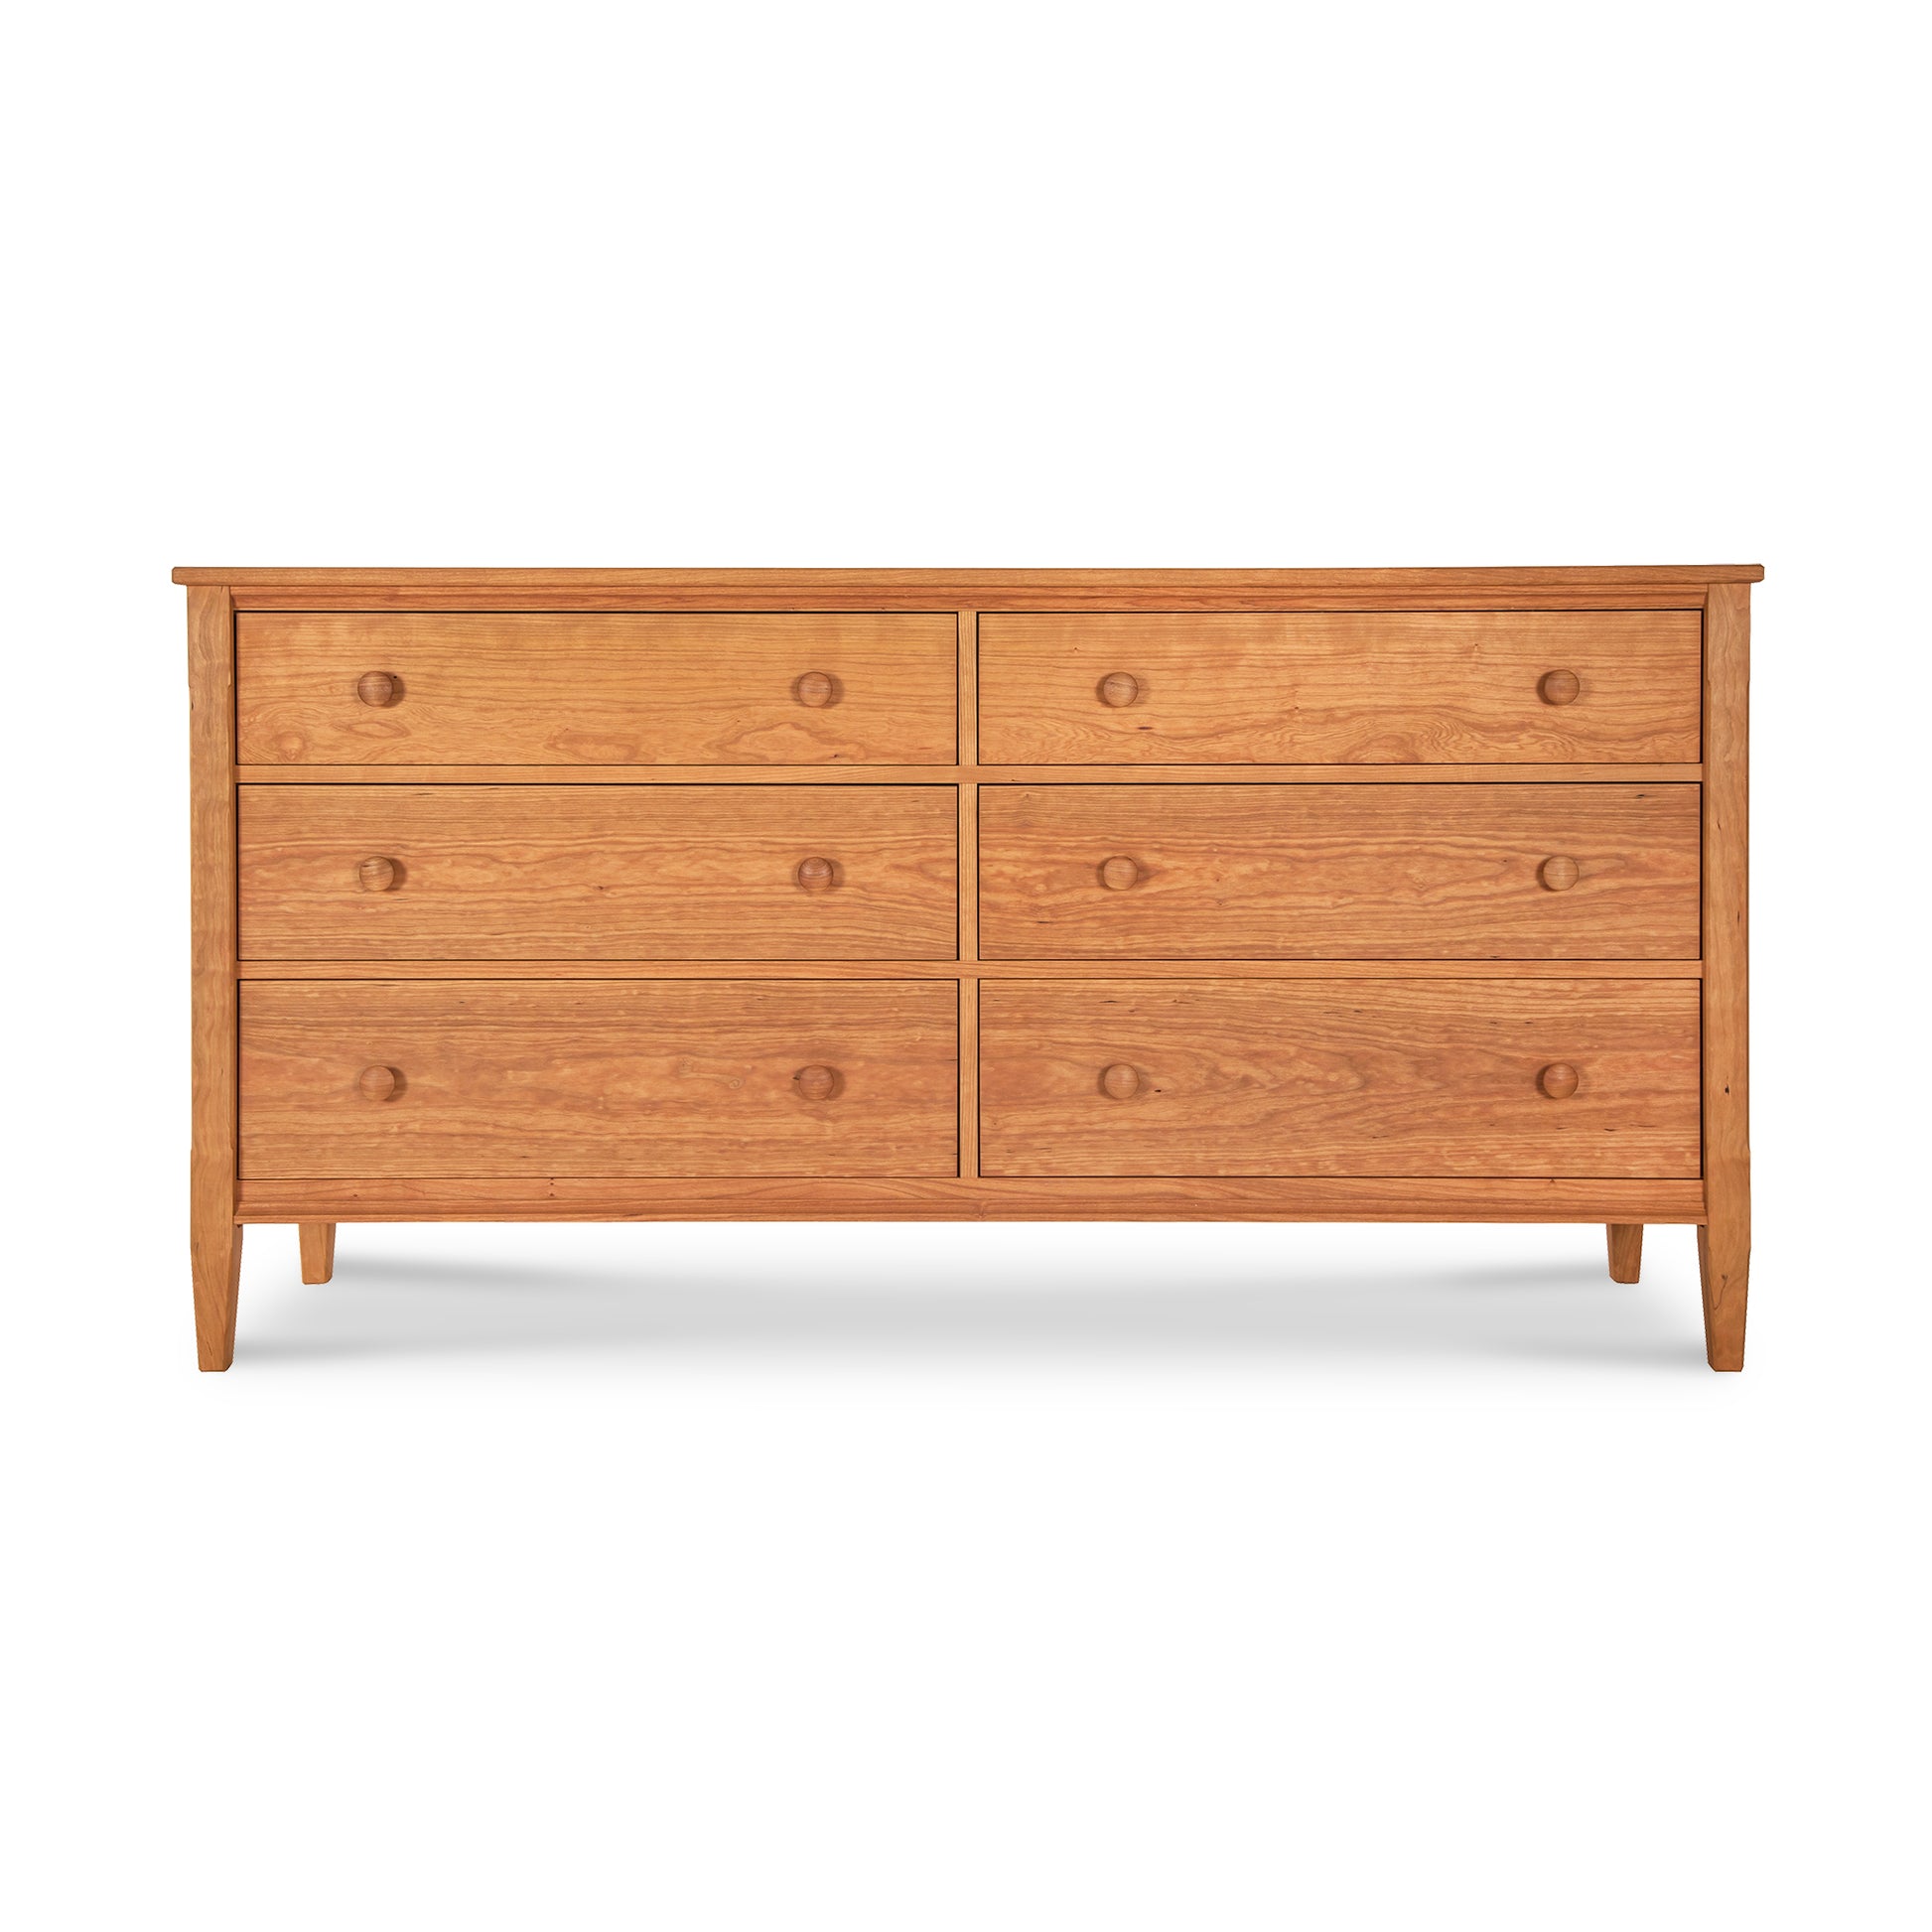 A Vermont Shaker 6-Drawer Dresser from Maple Corner Woodworks with drawers on a white background.